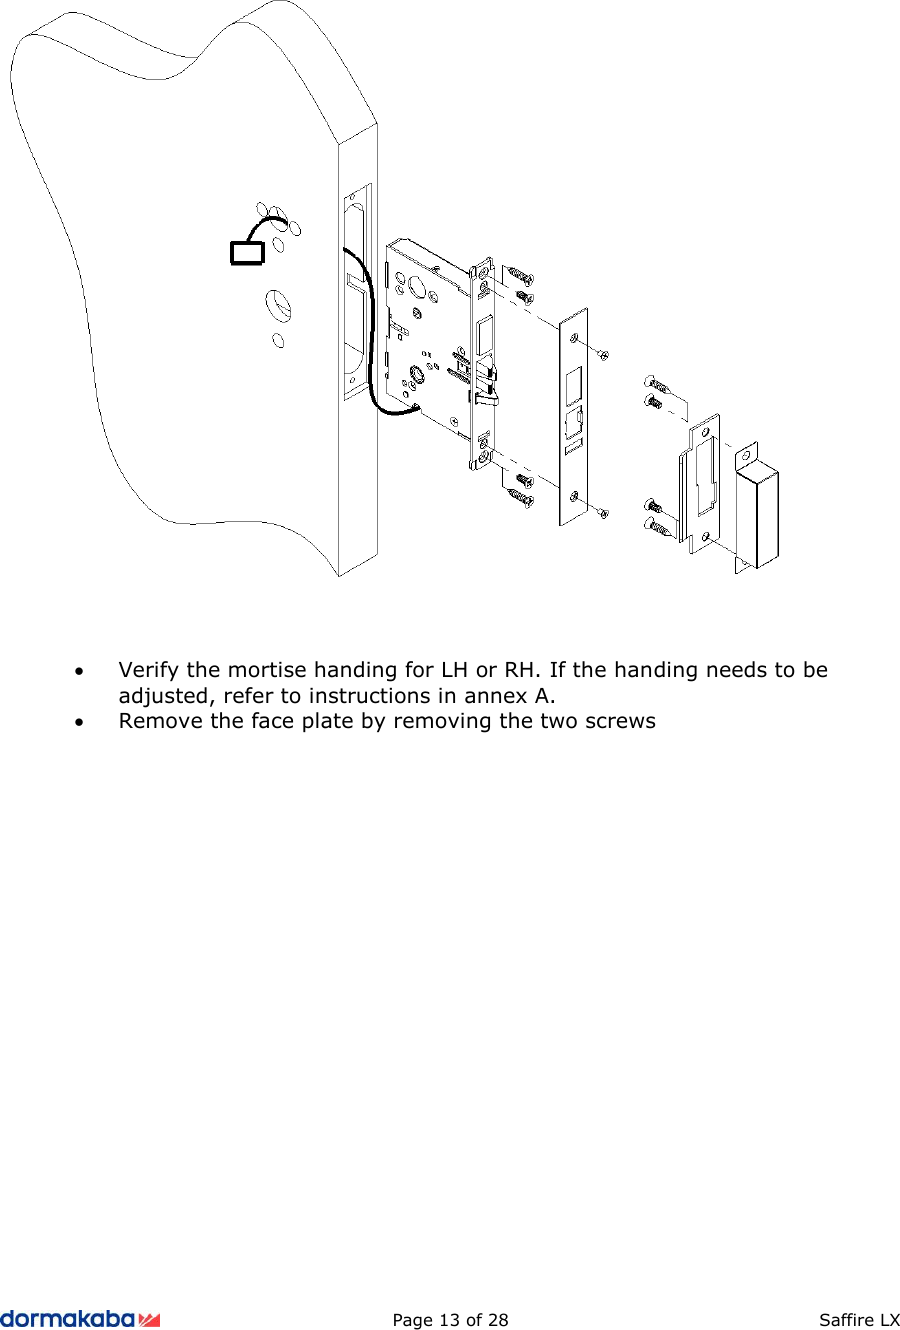          Page 13 of 28  Saffire LX           • Verify the mortise handing for LH or RH. If the handing needs to be adjusted, refer to instructions in annex A. • Remove the face plate by removing the two screws                       